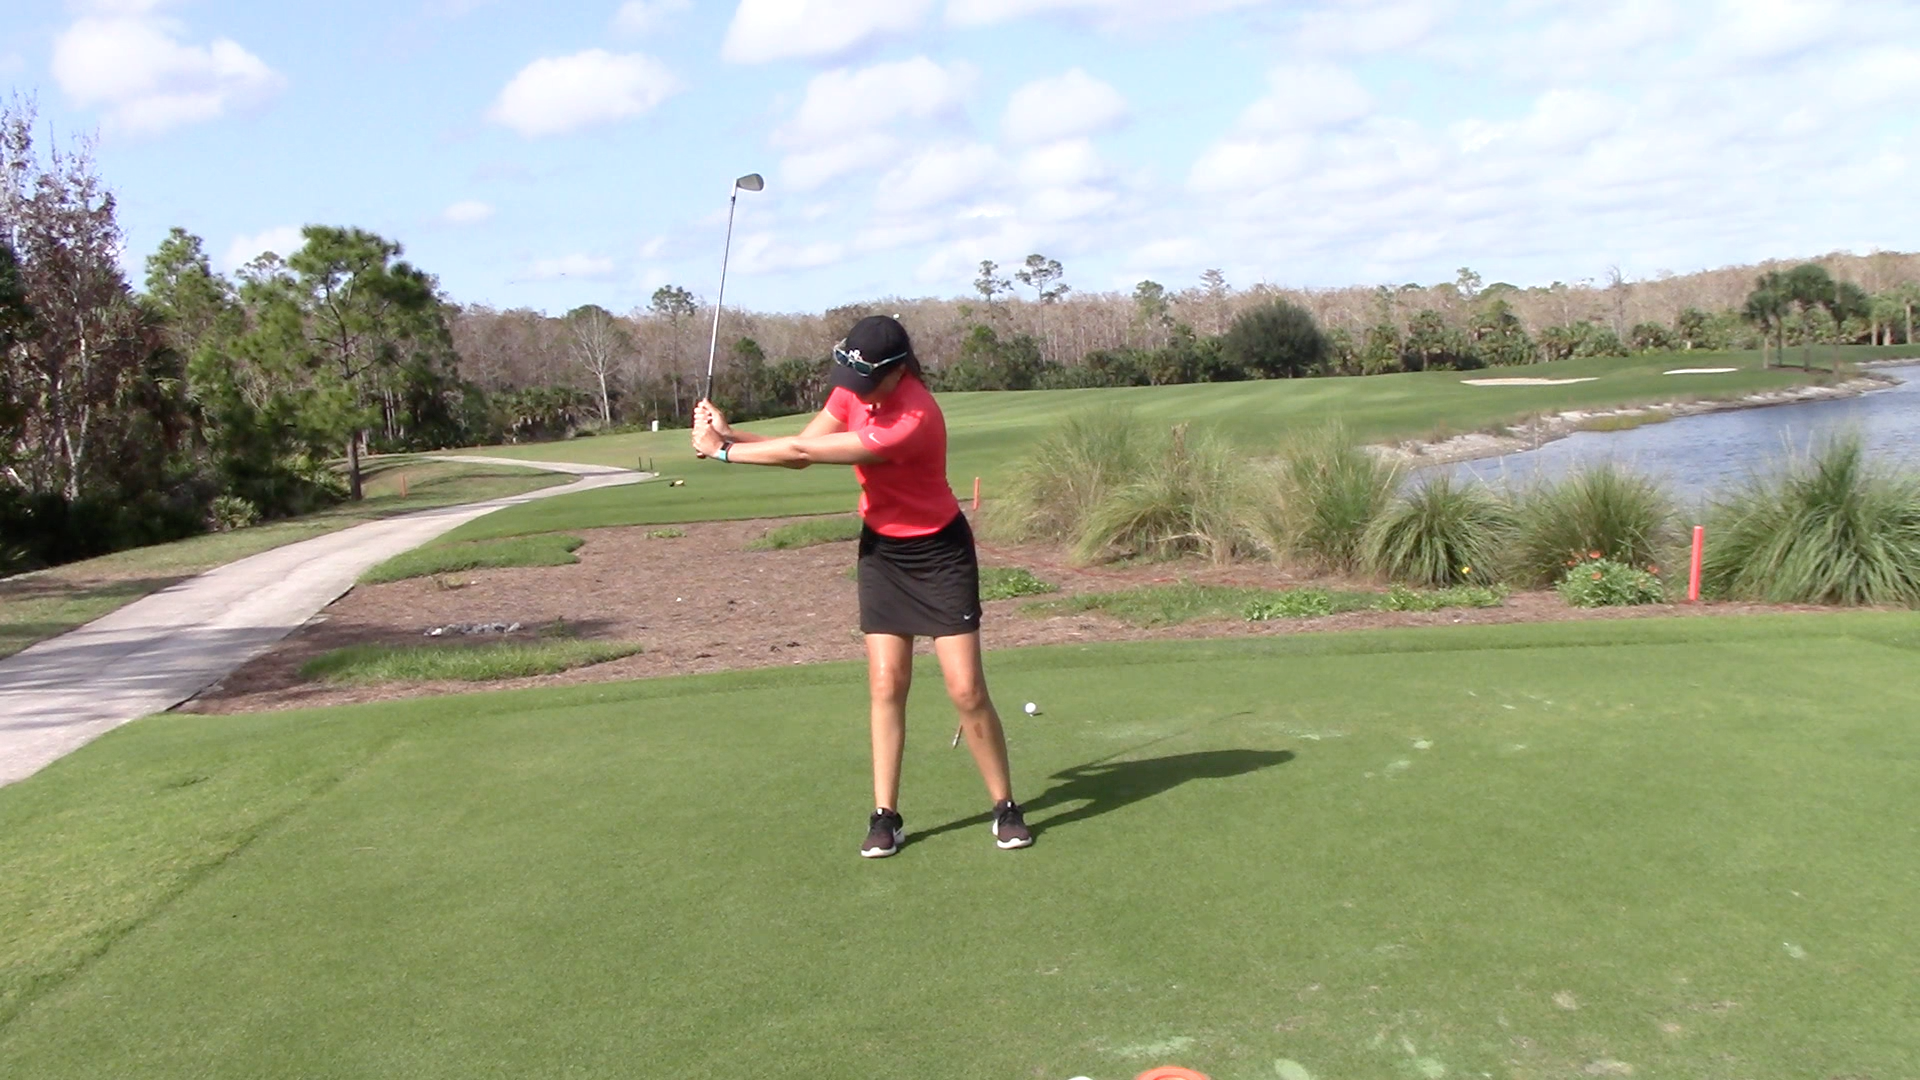 Power From A Short Backswing